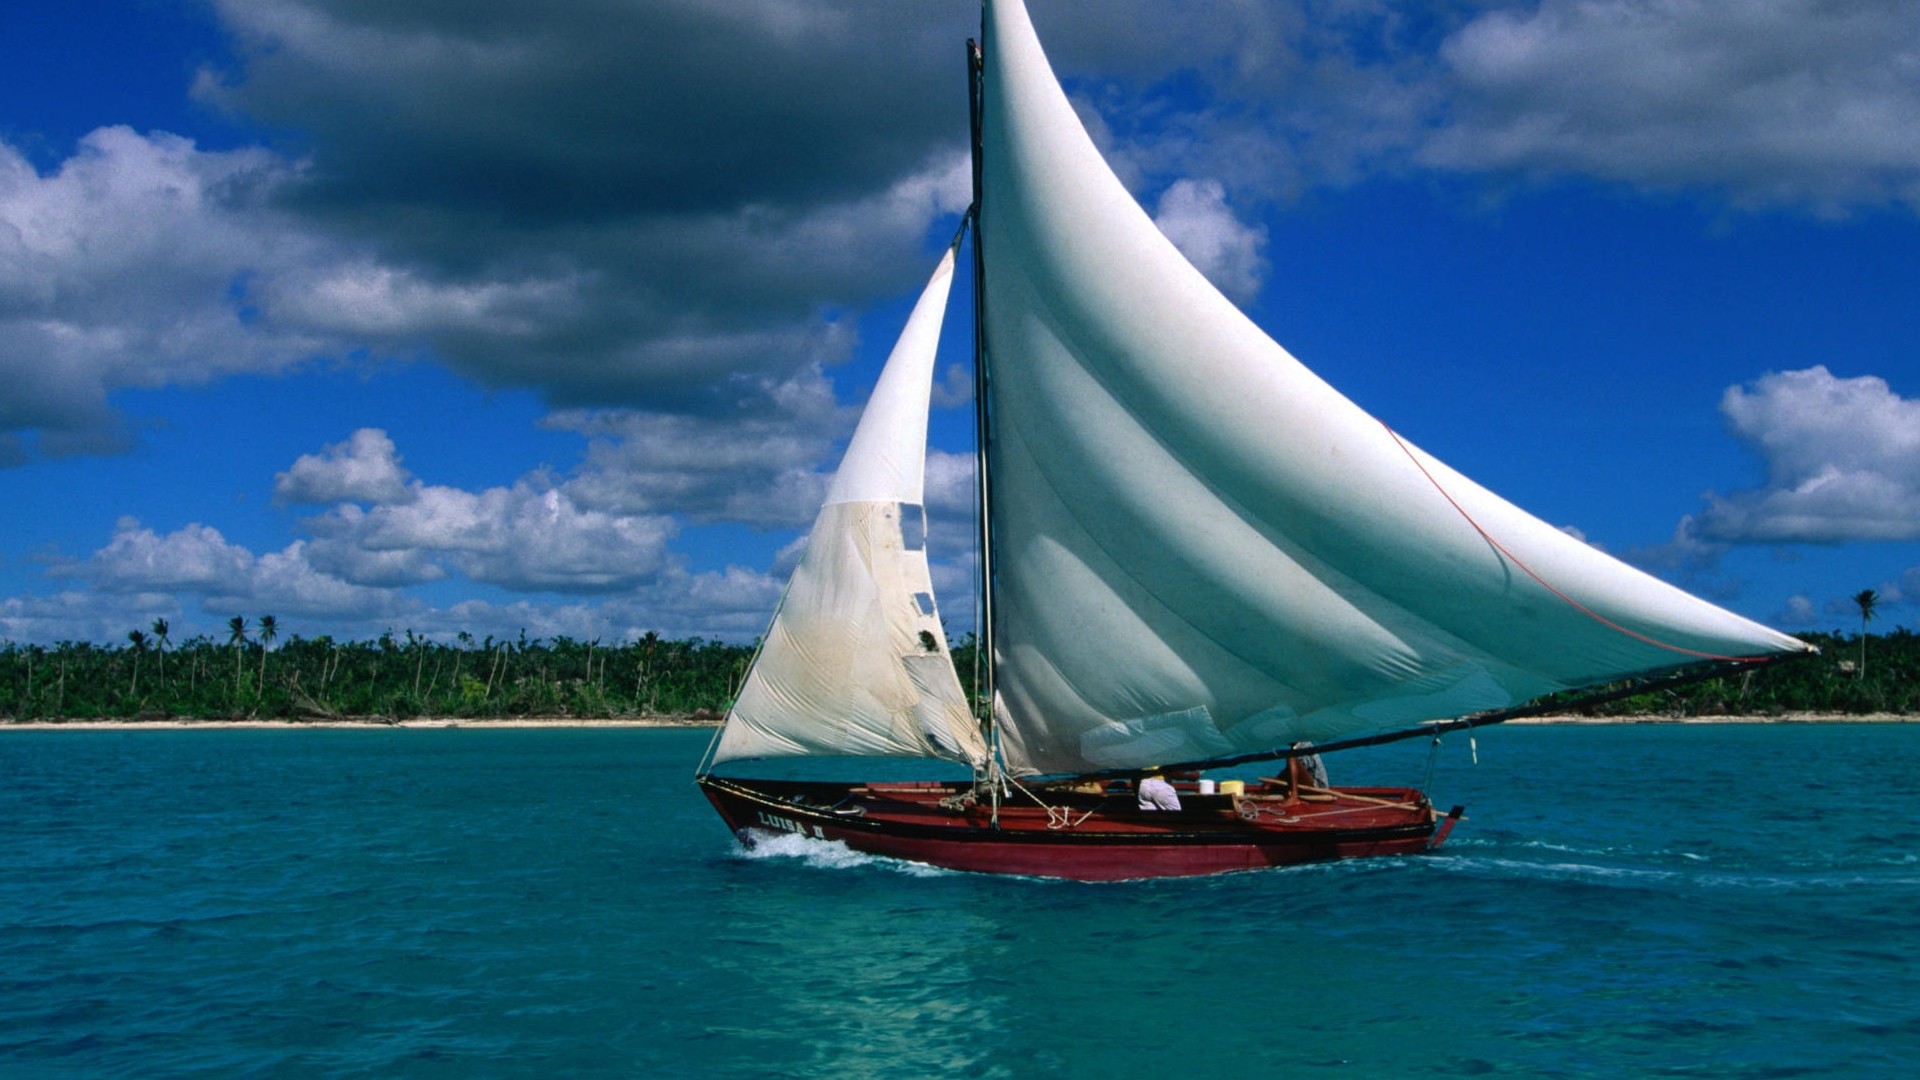 1920x1080  Sailing ship. How to set wallpaper on your desktop? Click the  download link from above and set the wallpaper on the desktop from your OS.